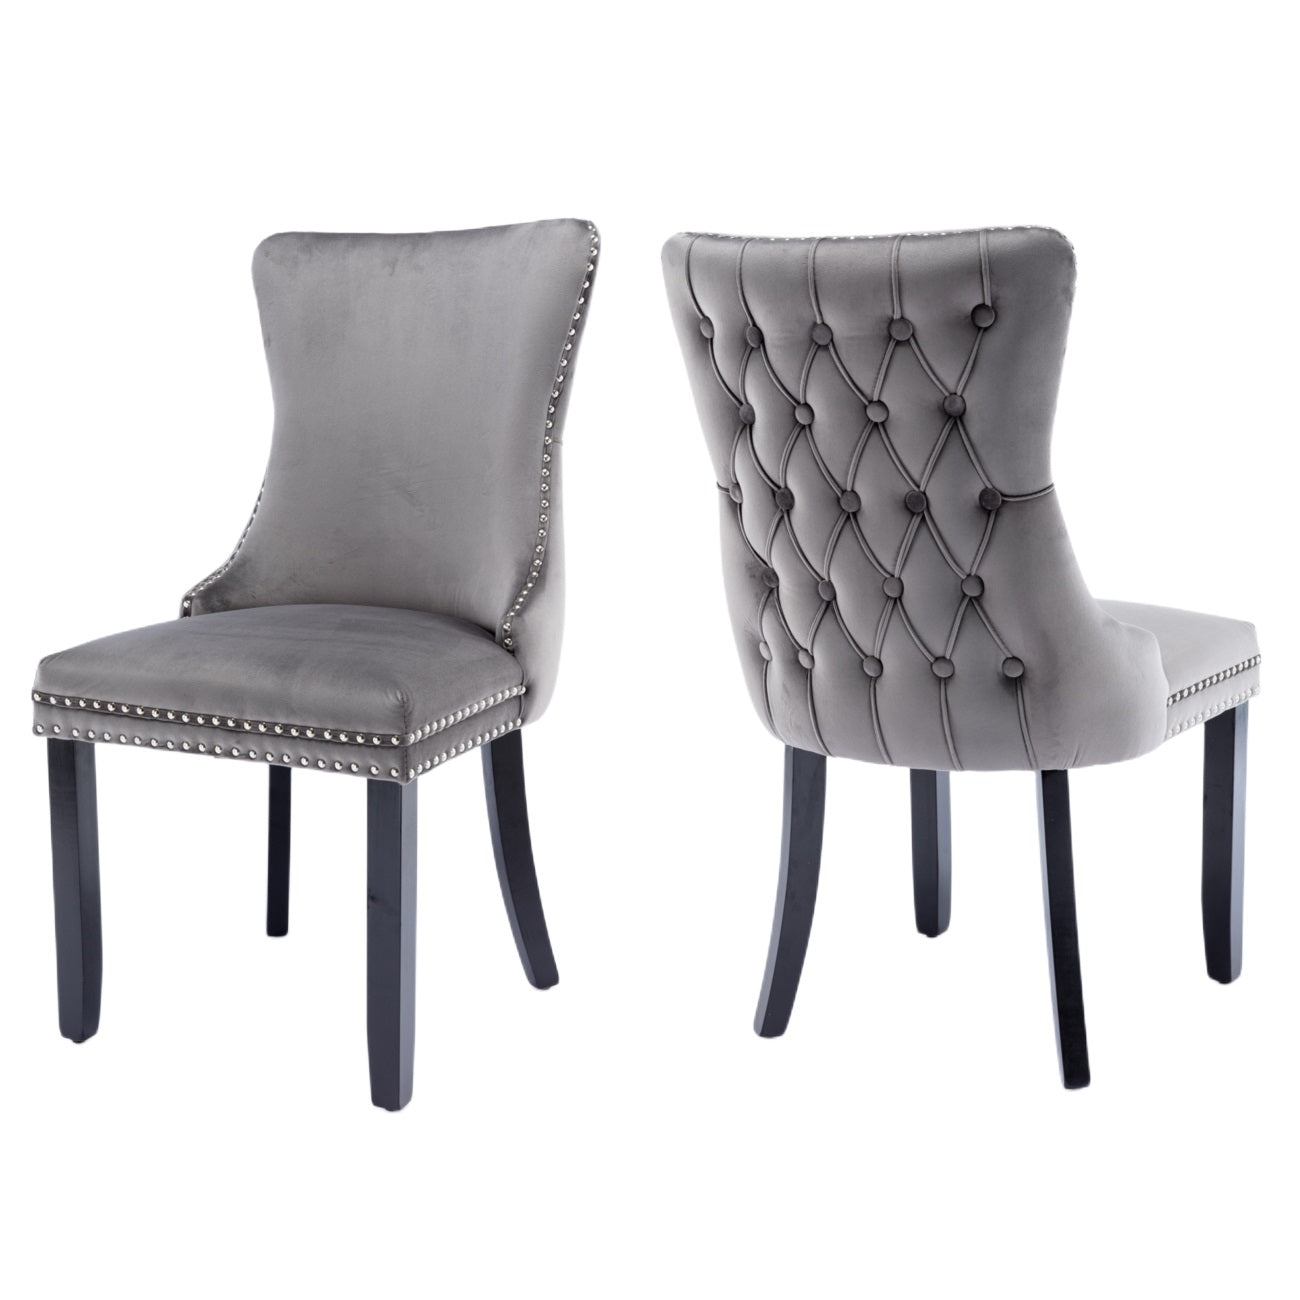 6x Velvet Upholstered Dining Chairs Tufted Wingback Side Chair with Studs Trim Solid Wood Legs for Kitchen